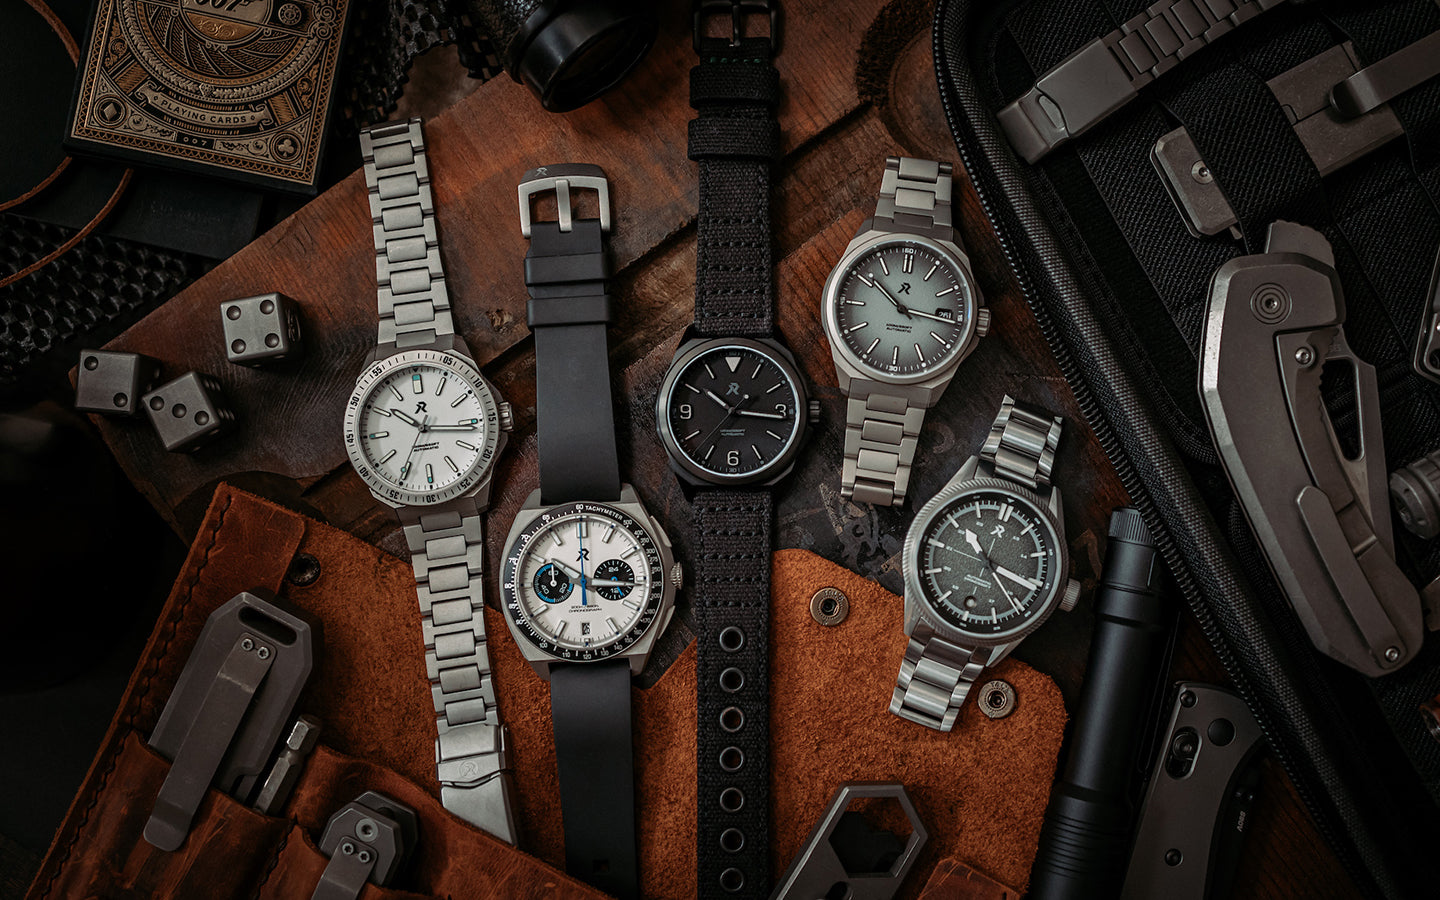 ALL WATCHES